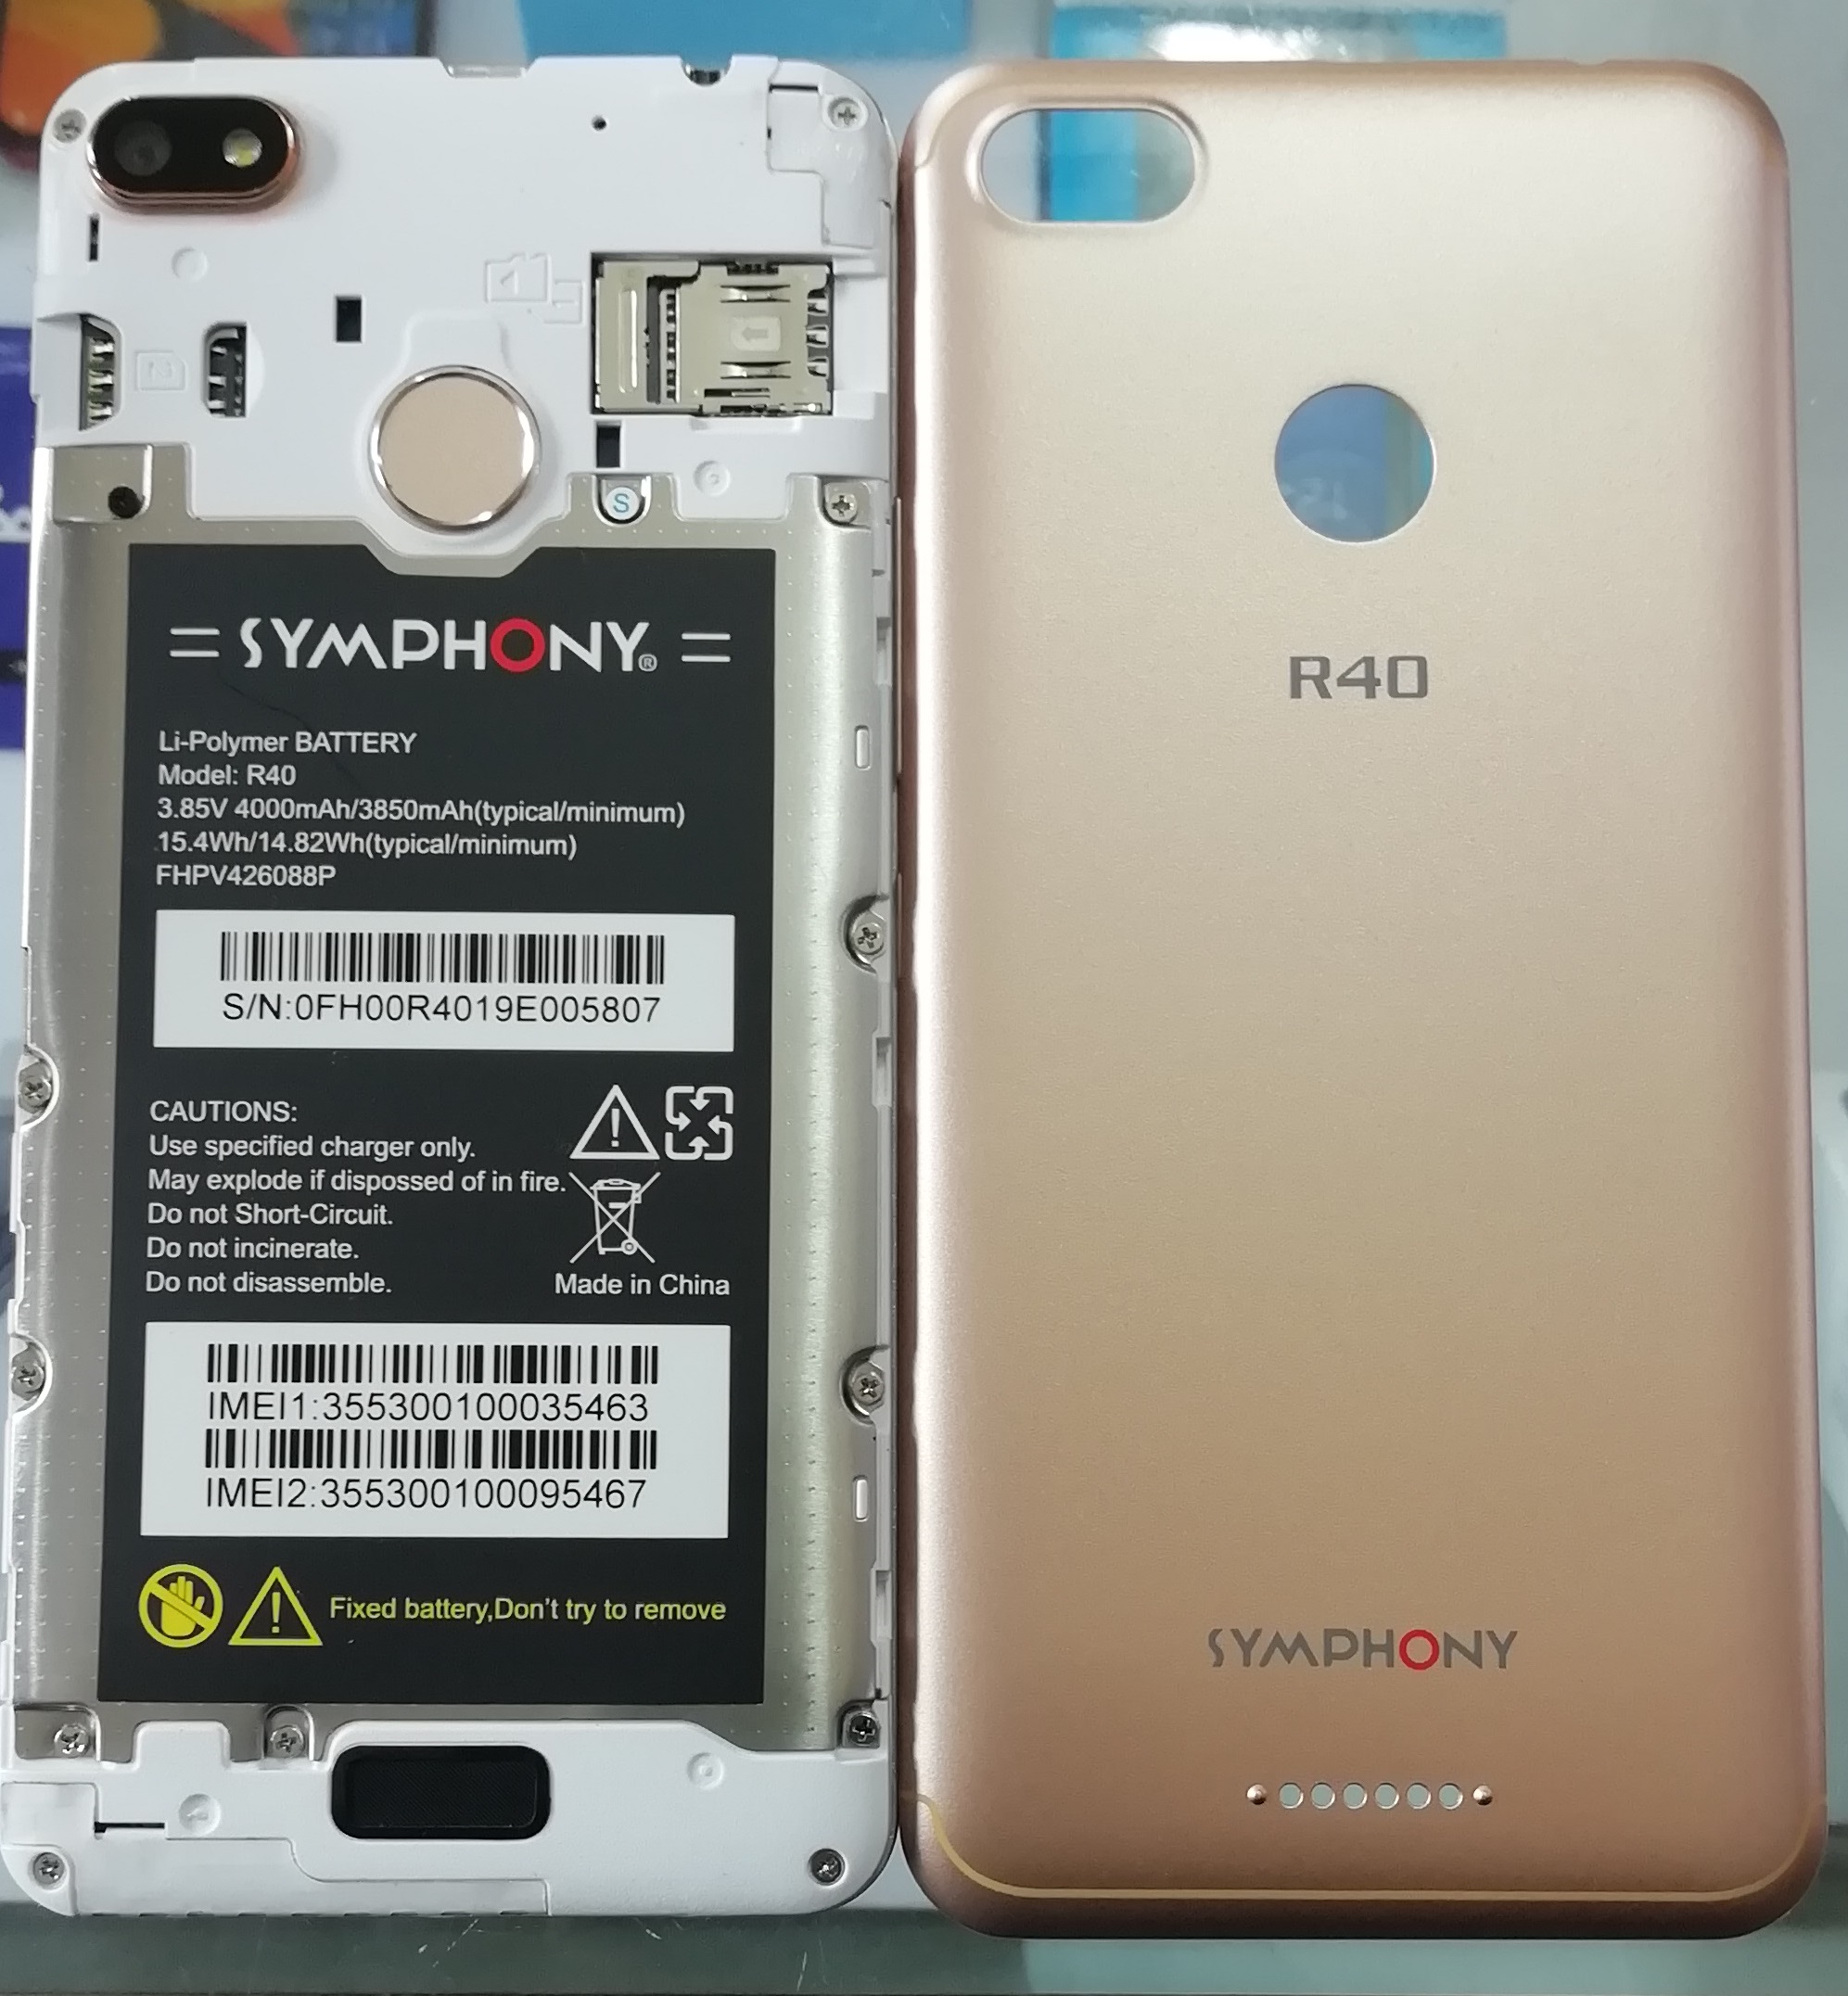 Symphony R40 Flash File All Version Firmware Download | EasyFlashFile